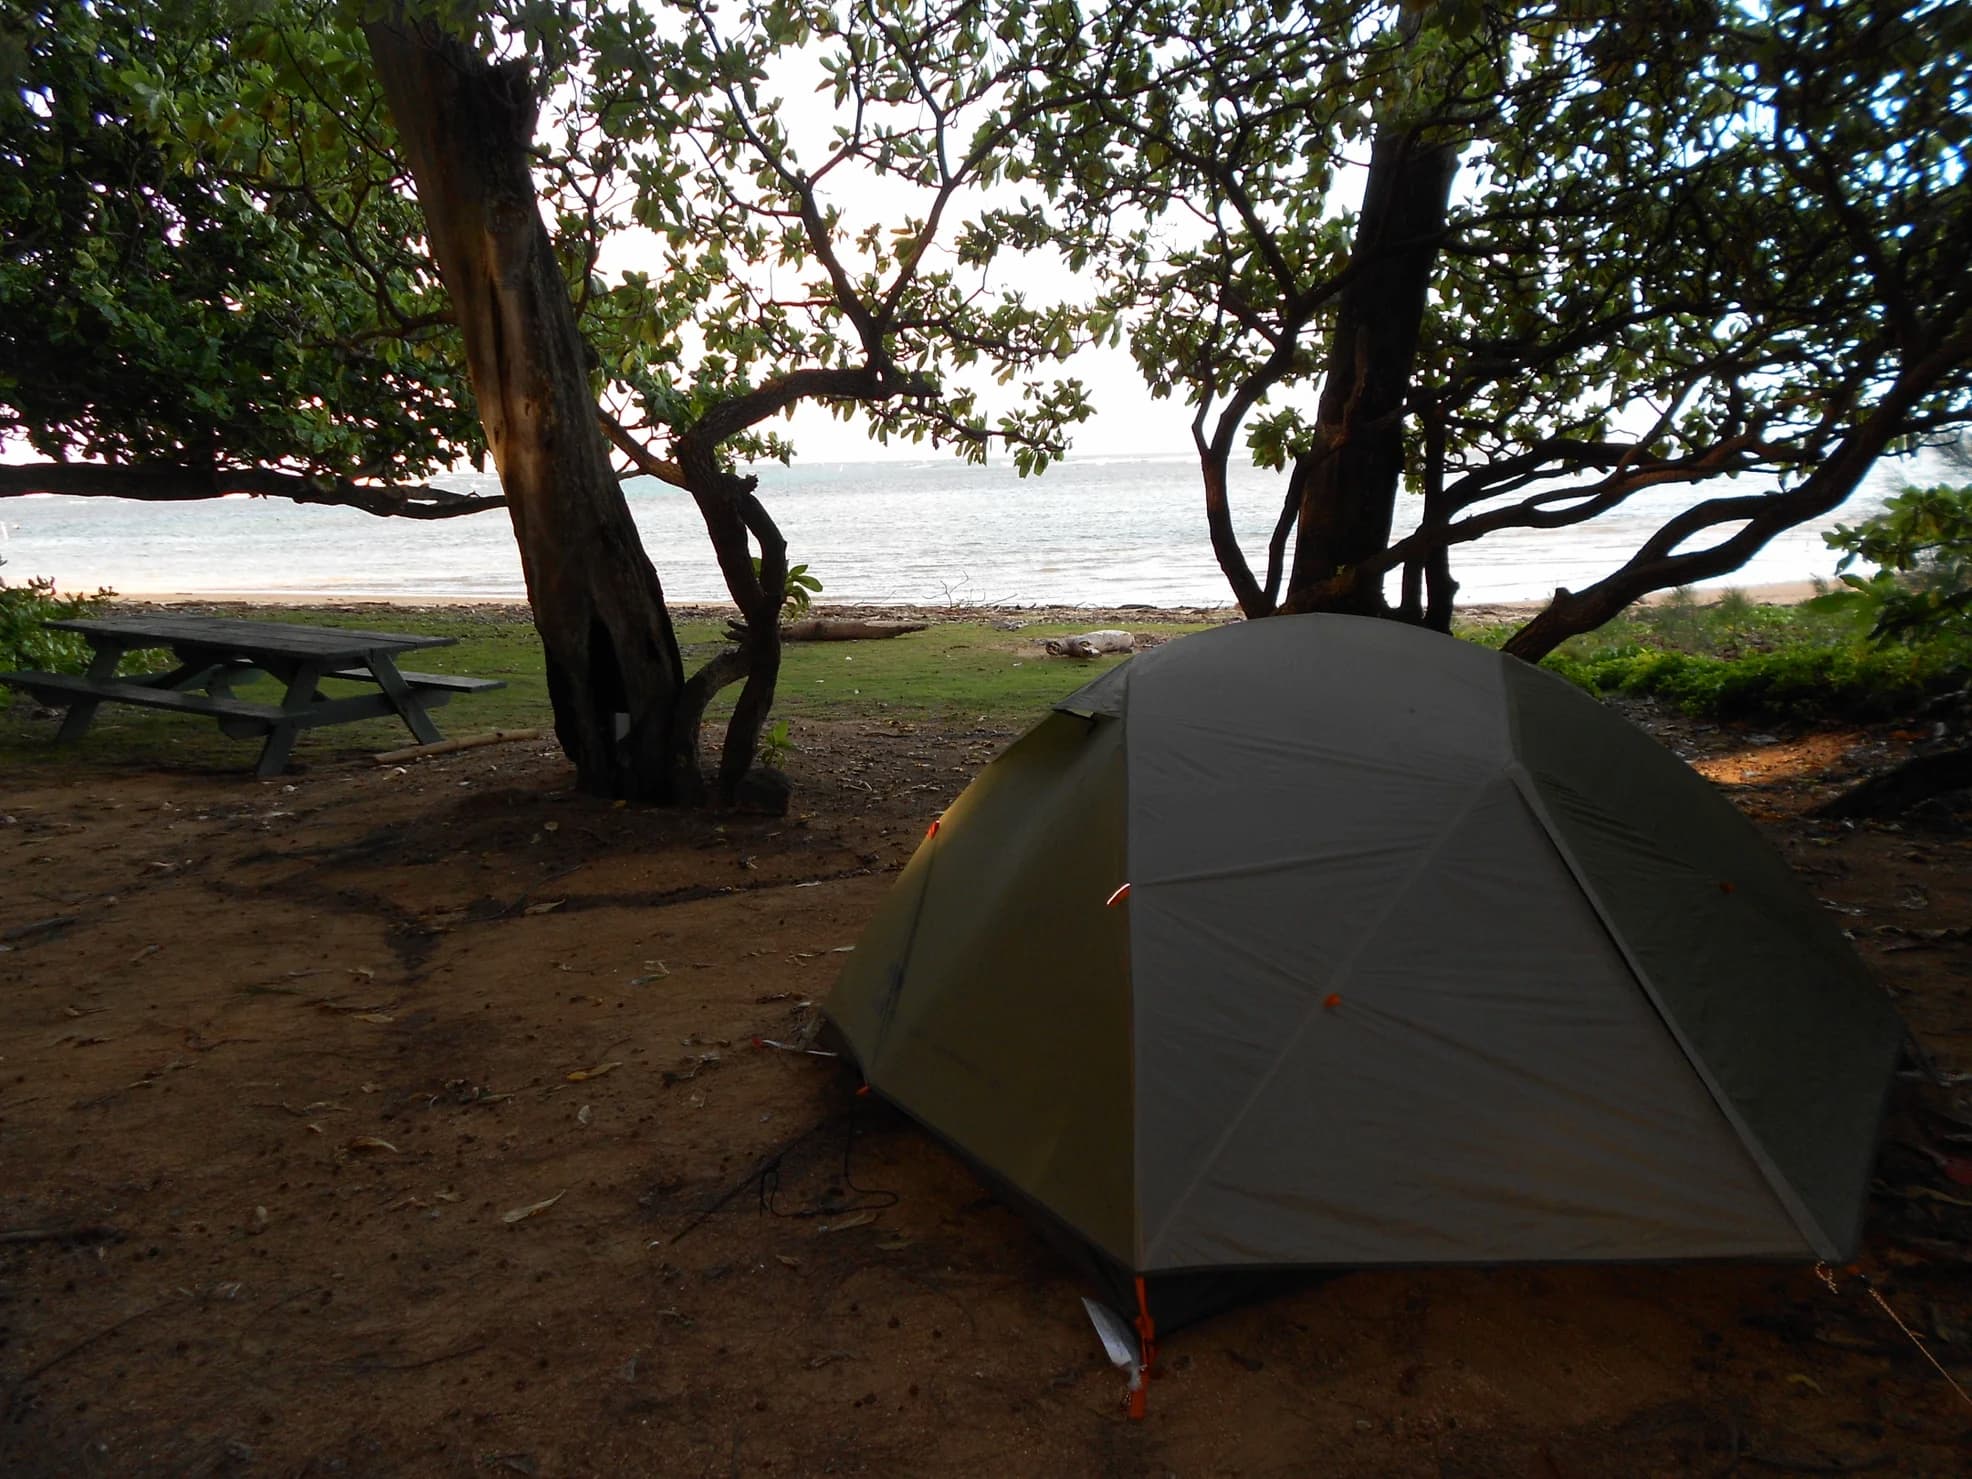 Tent pitched in the woods beside the beach on the coast of Hawaii.